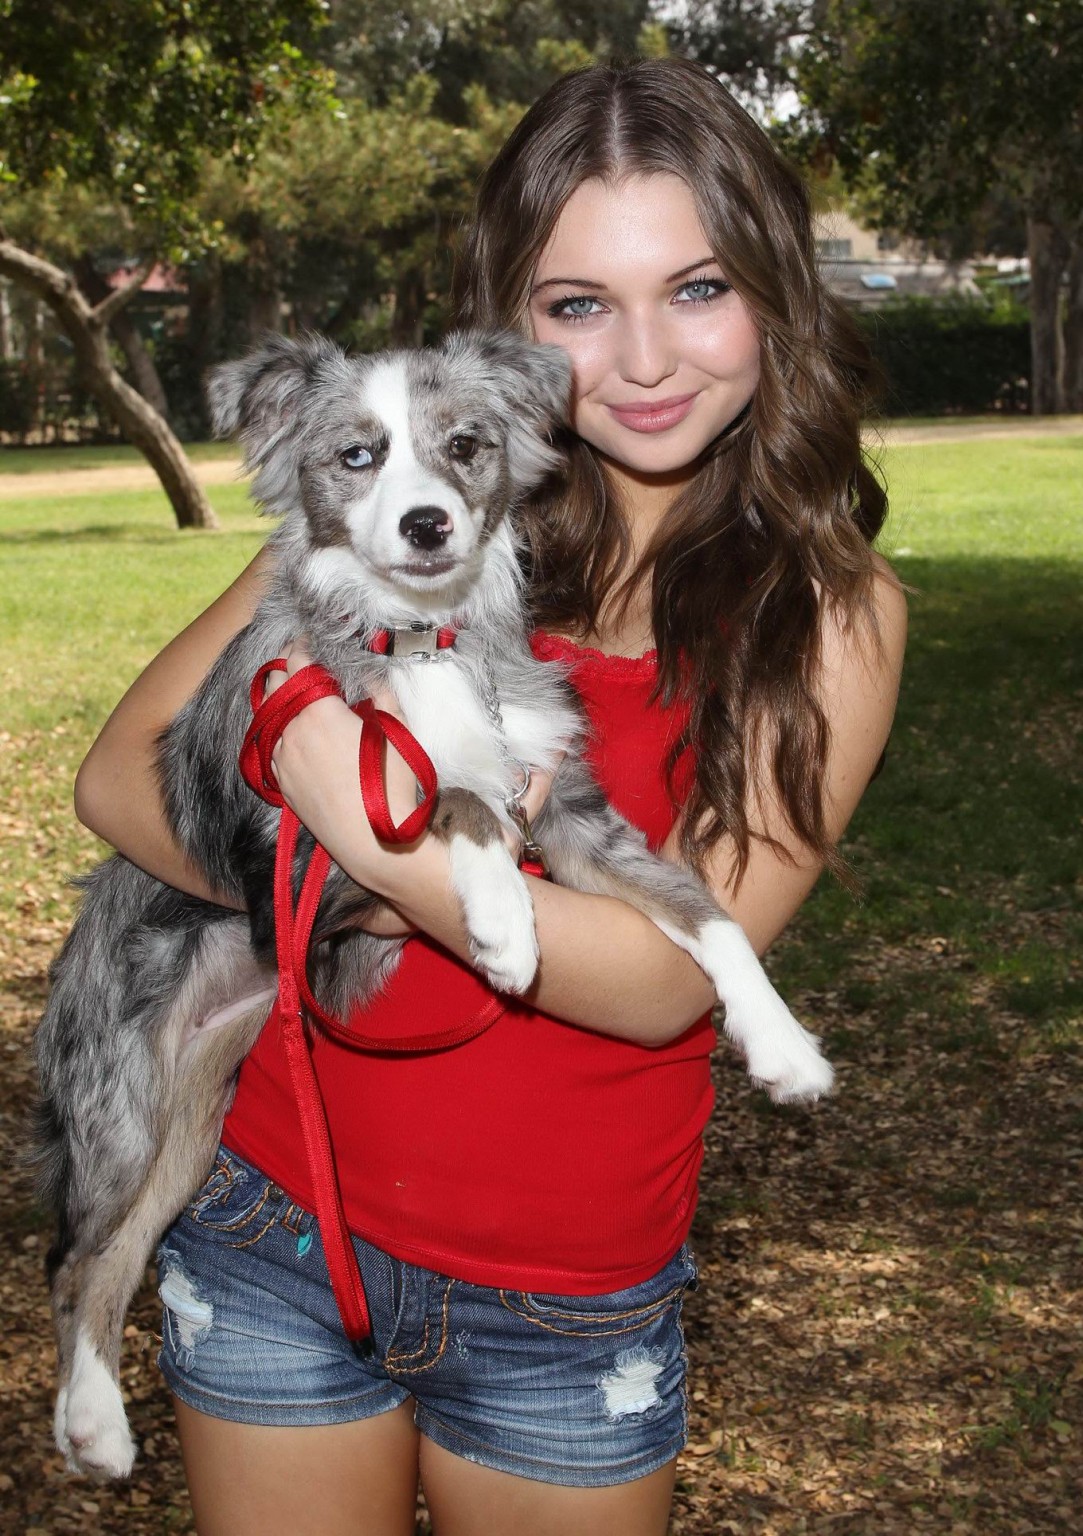 Sammi Hanratty leggy in tiny red top and hotpants at the park in North Hollywood  Porn Pictures, XXX Photos, Sex Images #3232631 - PICTOA